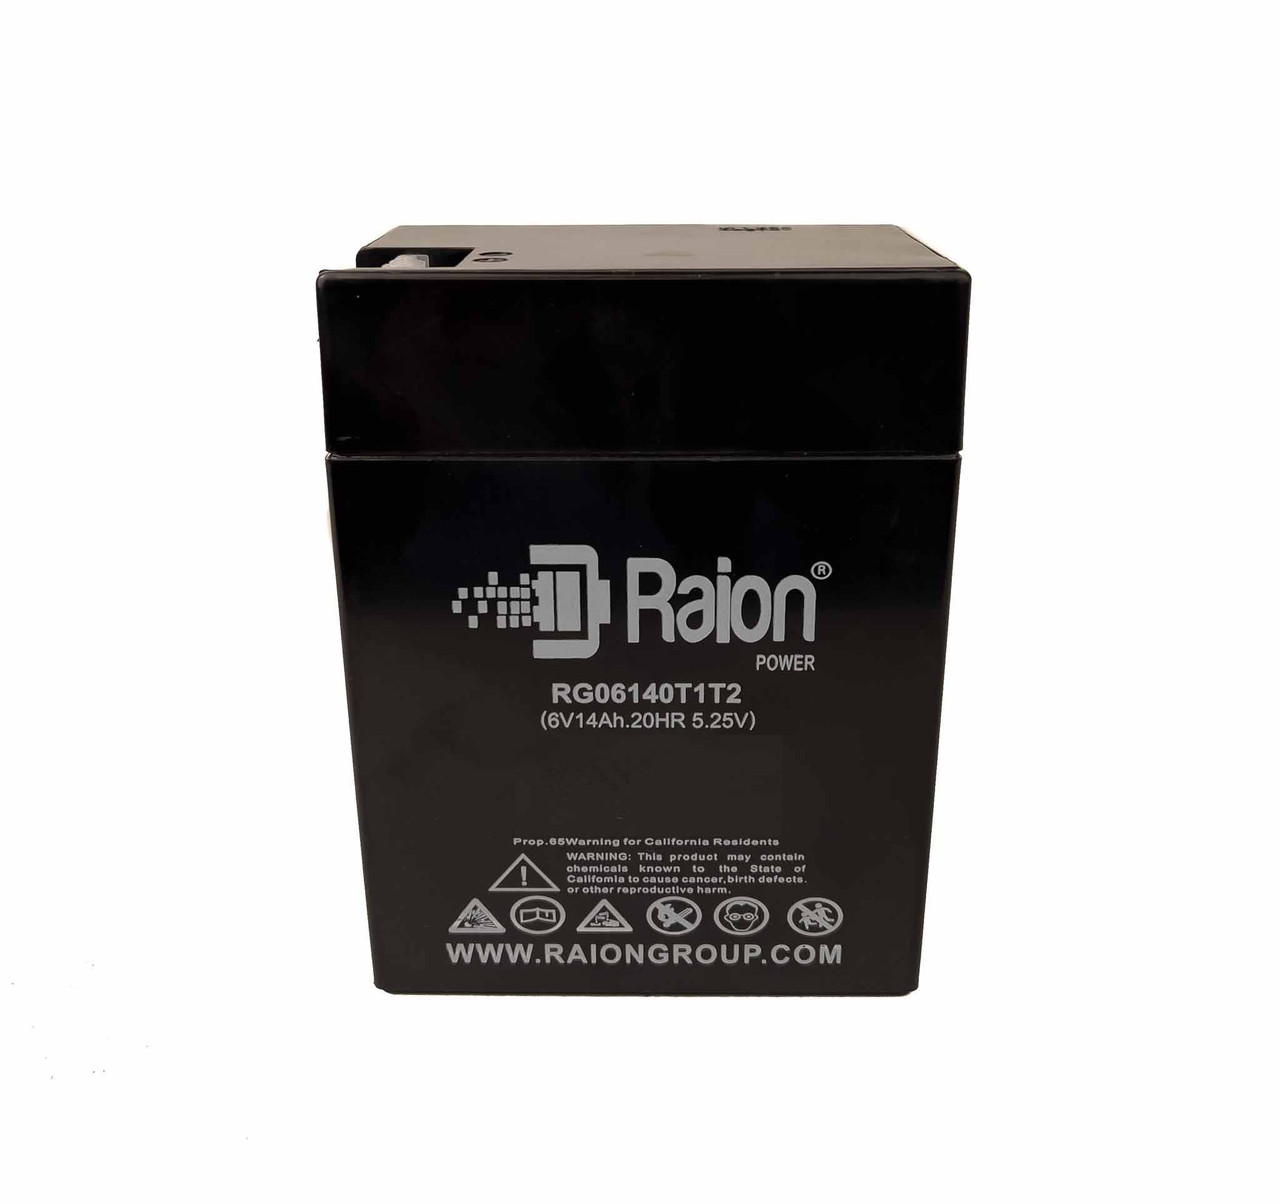 Raion Power RG06140T1T2 6V 14Ah Replacement T1T2 Battery Terminals for Cycle Sound Raider 550 (Hong Kong) 74535-9563